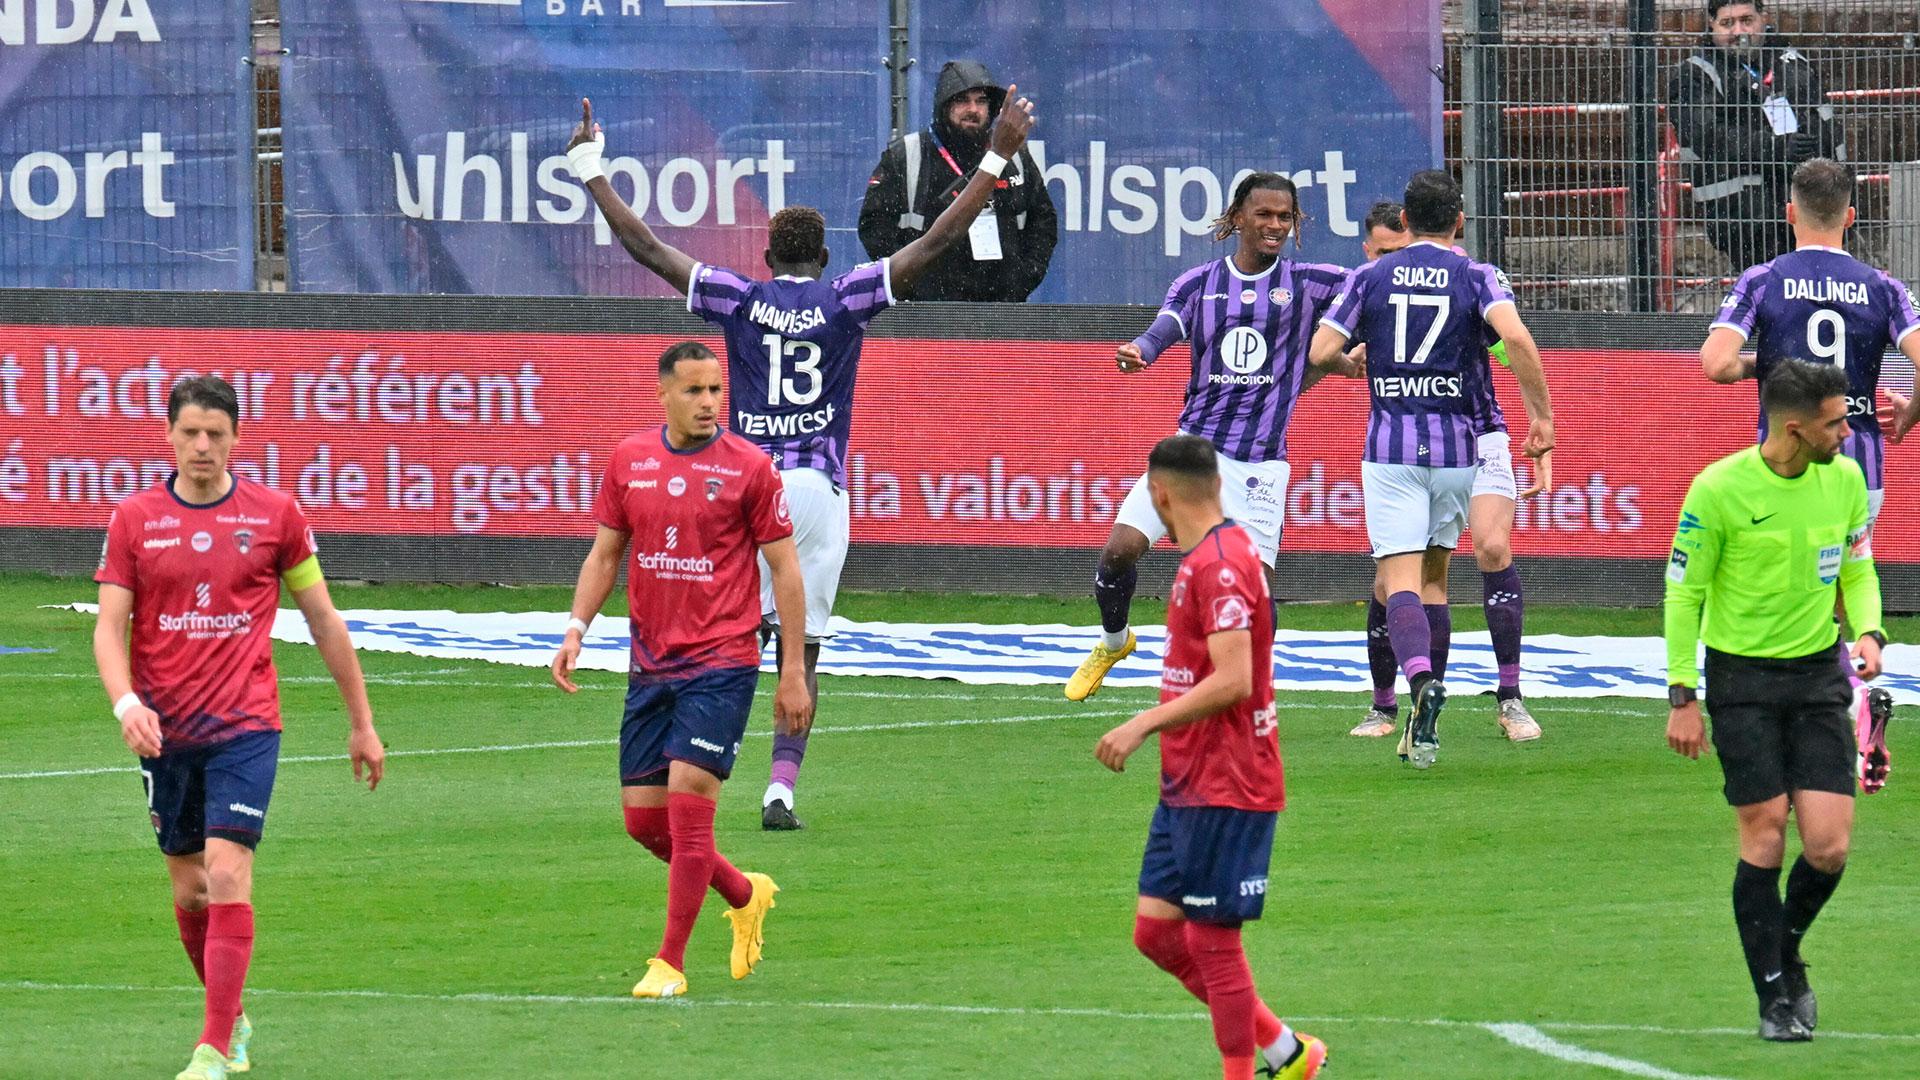 VIDEO | Ligue 1 Highlights: Clermont Foot vs Toulouse